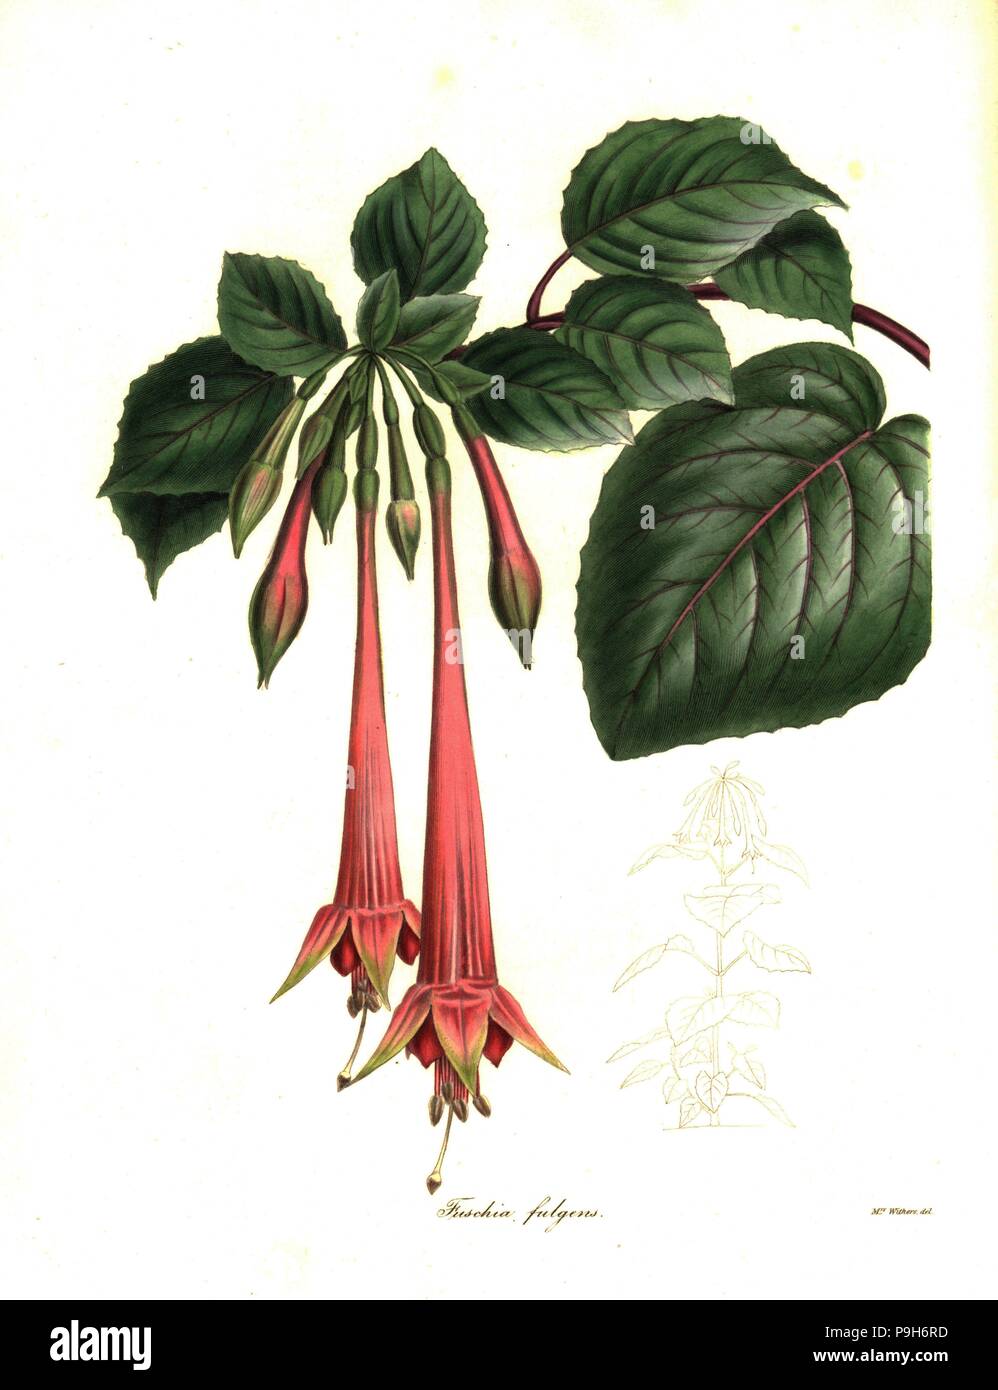 Brilliant fuchsia, Fuchsia fulgens. Handcoloured copperplate engraving after a botanical illustration by Mrs Augusta Withers from Benjamin Maund and the Rev. John Stevens Henslow's The Botanist, London, 1836. Stock Photo